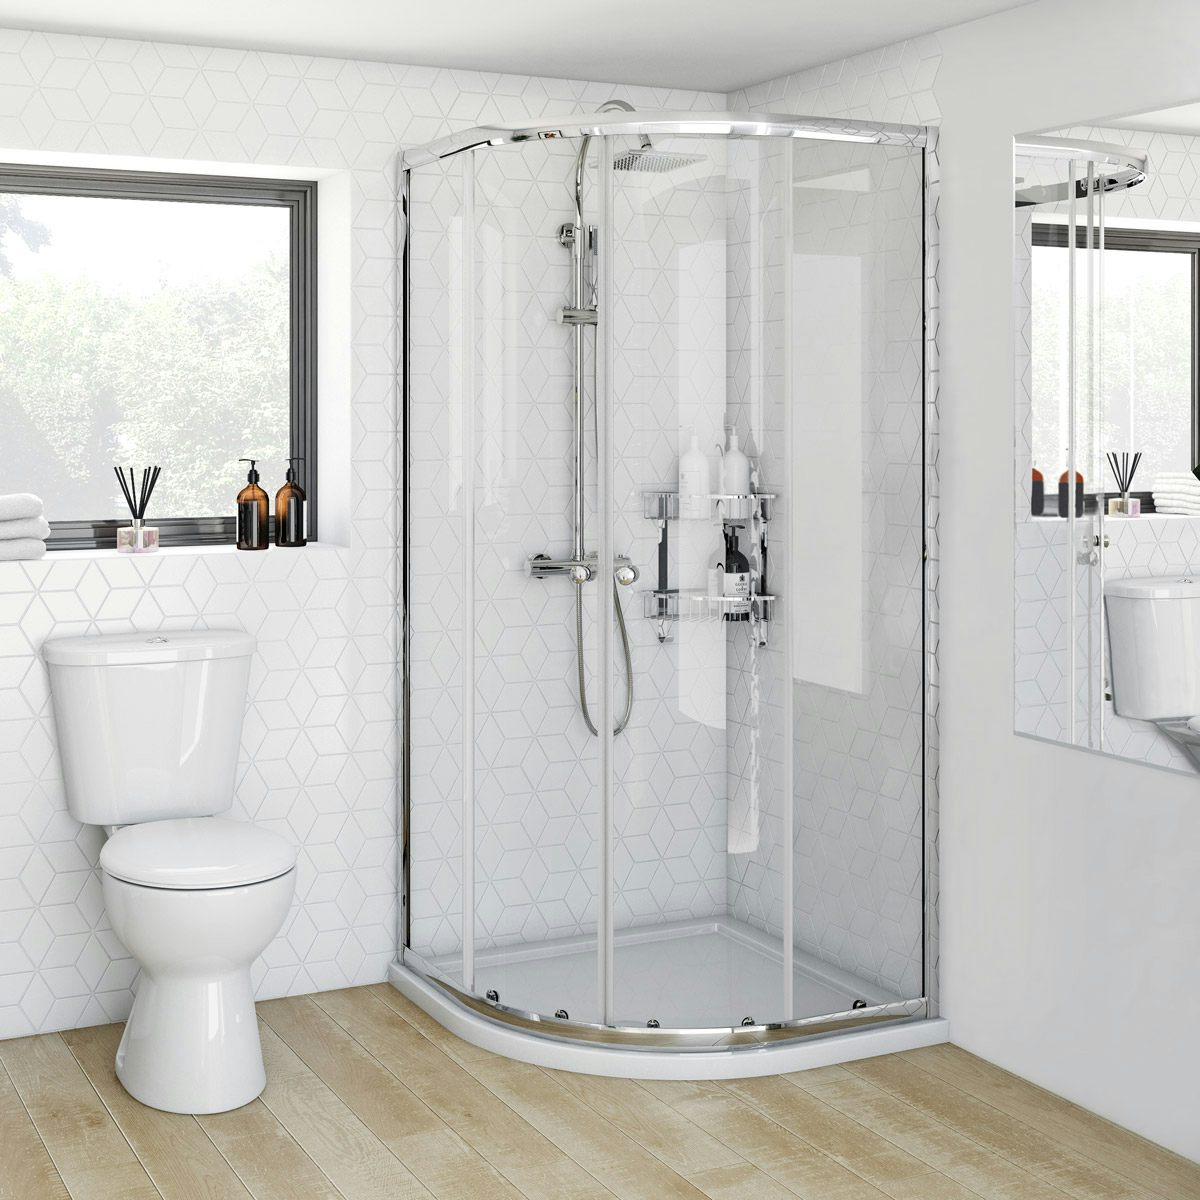 Clarity 4mm quadrant shower enclosure 900 x 900 with Orchard square shower riser system